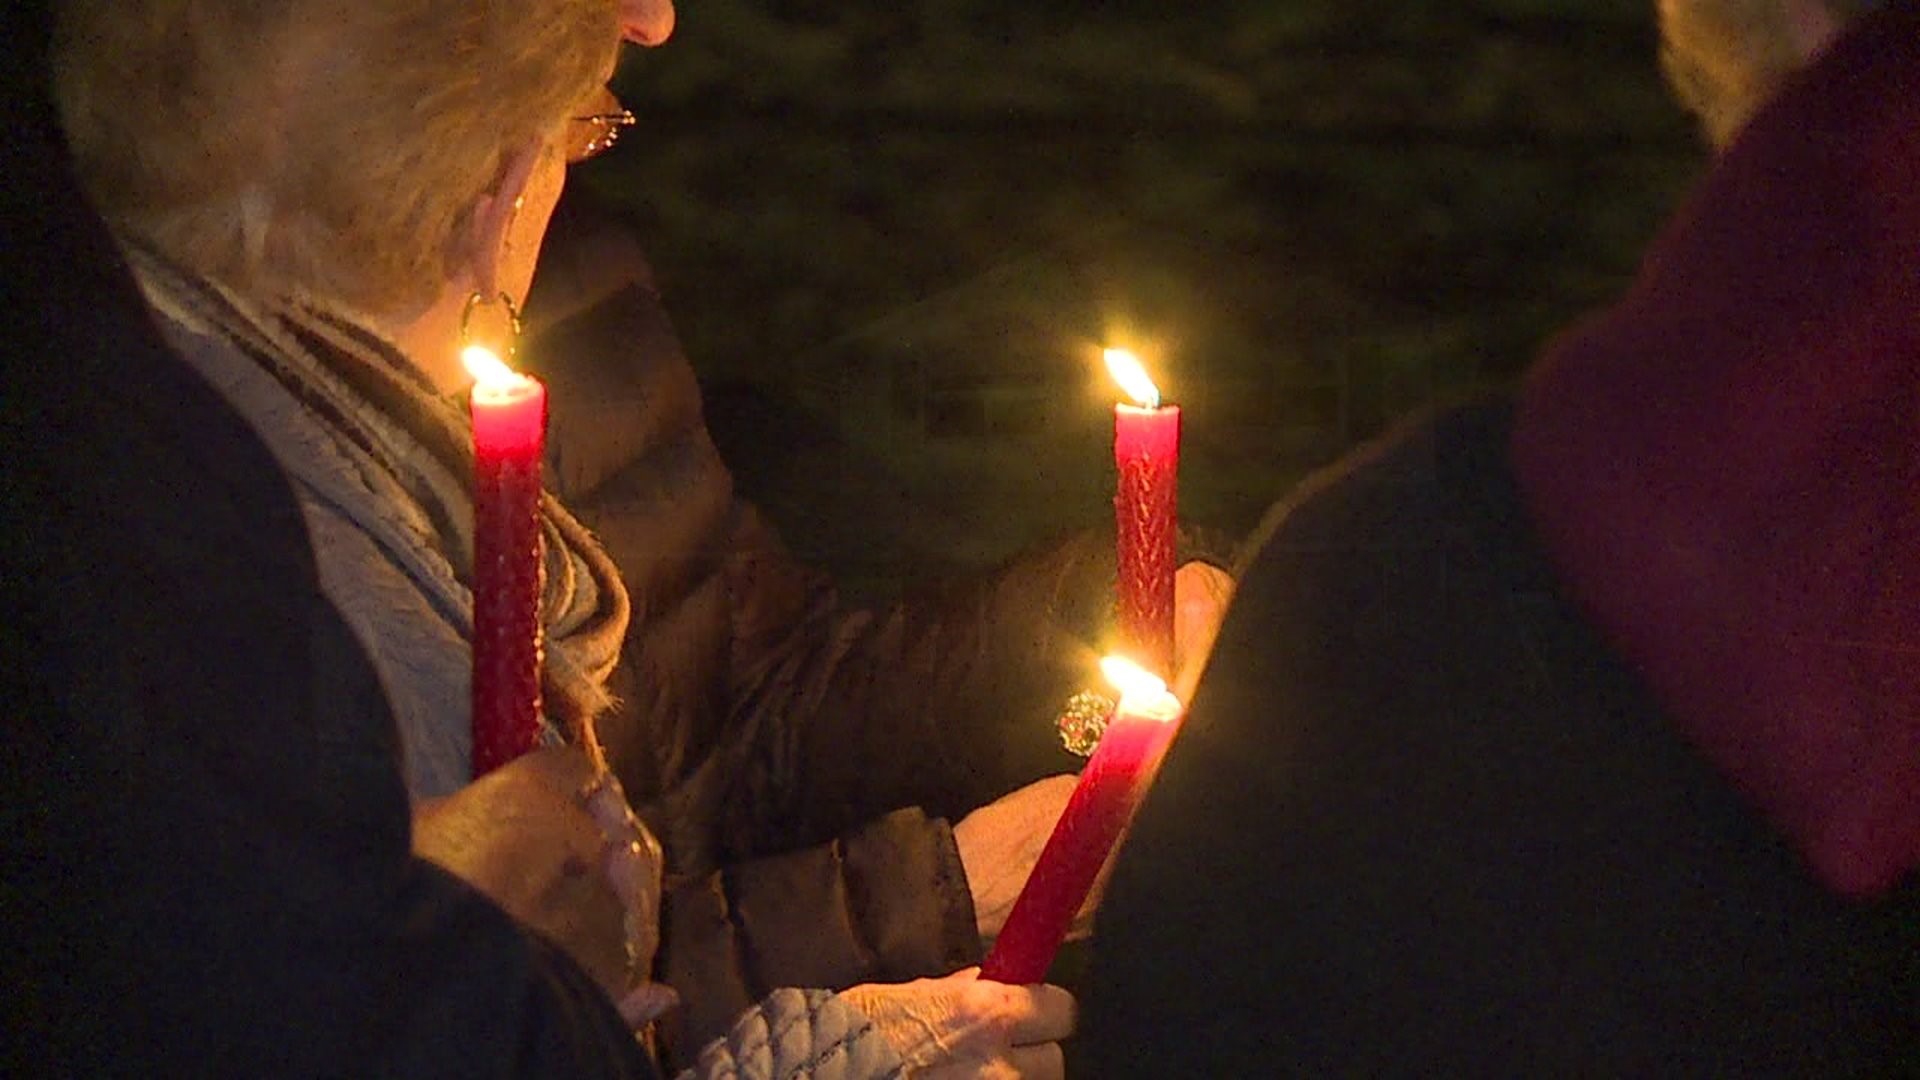 A Vigil, A Memorial and More Questions About Deadly Arson That Killed 2 Brothers